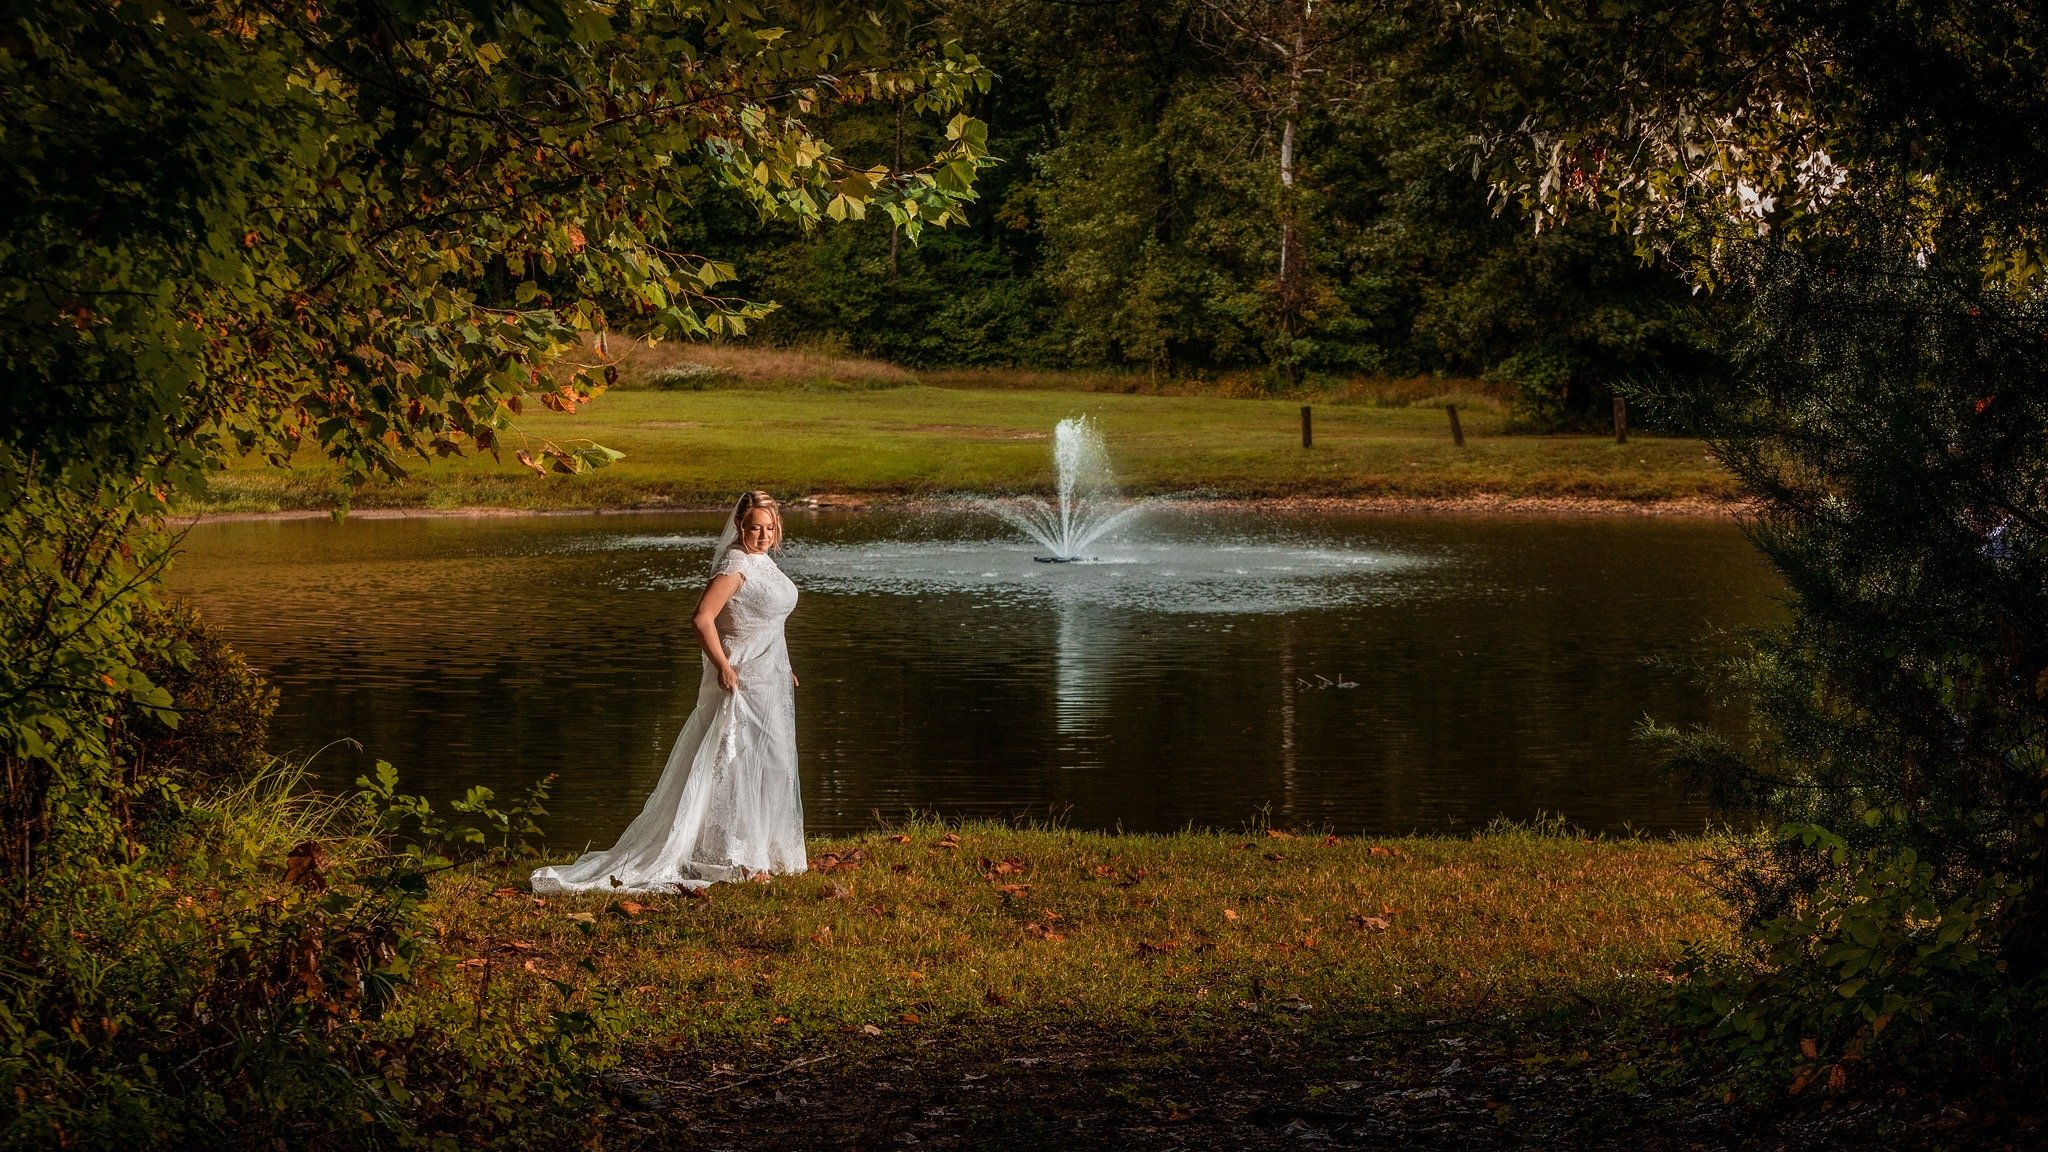 Nature-Surrounds-Fall-Bride-With-Pond-Fountain 2.jpg